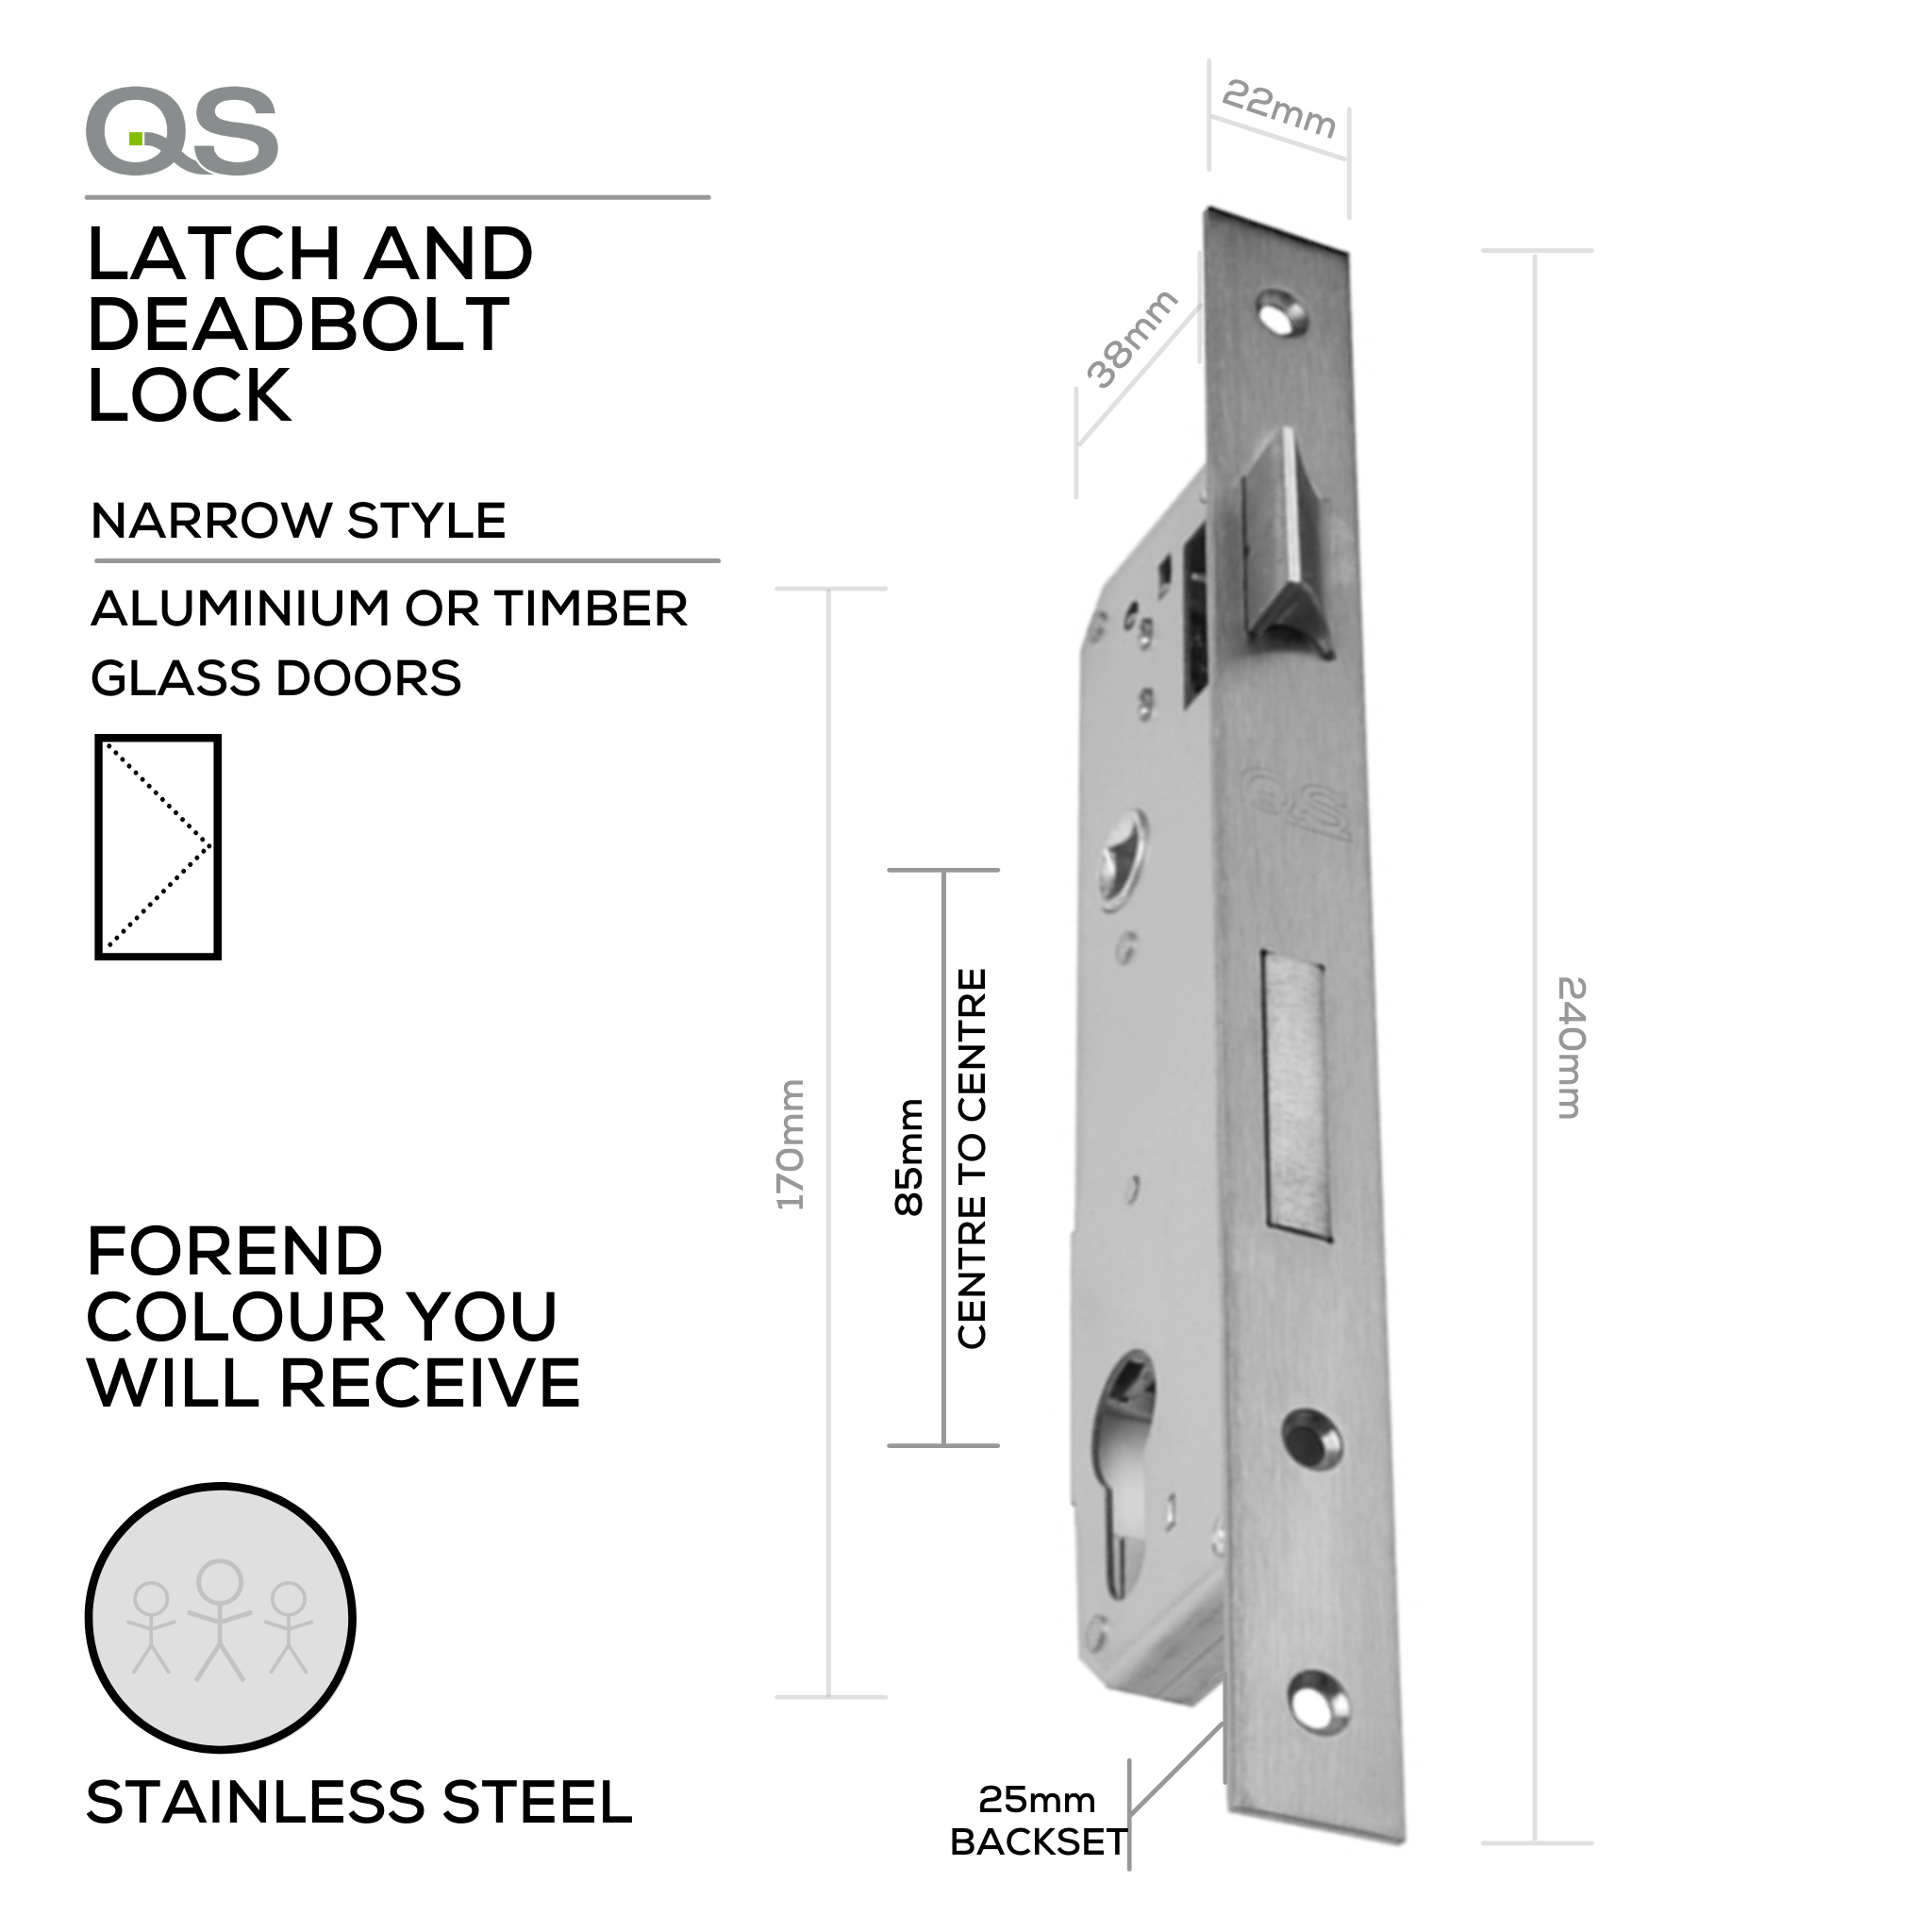 QS8525/1SS, Narrow Style, Latch & Deadbolt Lock, Euro Cylinder, Excluding Cylinder, 25mm (Backset), 85mm (ctc), Stainless Steel, QS